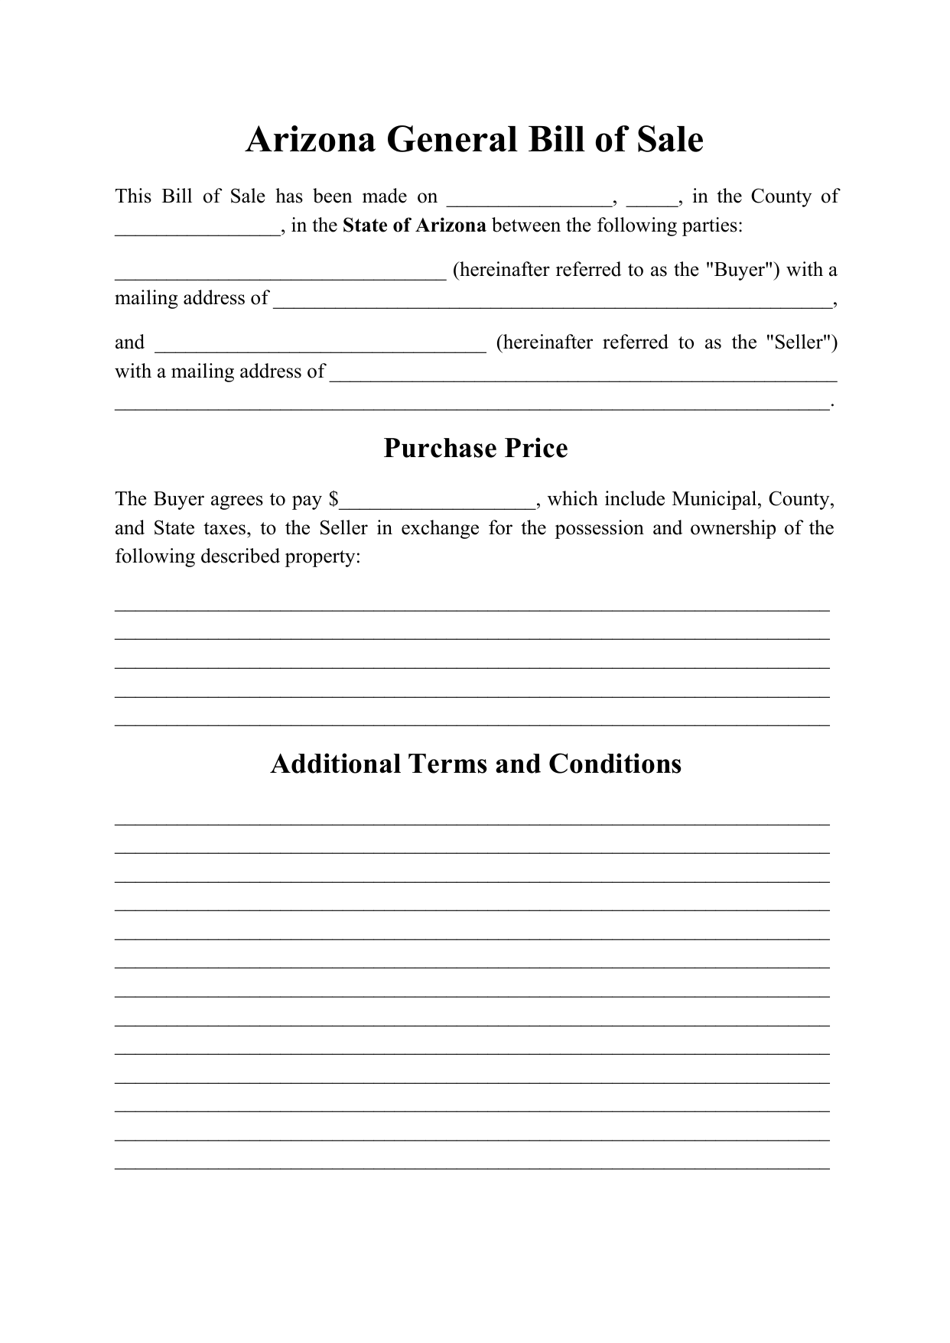 arizona-generic-bill-of-sale-form-fill-out-sign-online-and-download-pdf-templateroller